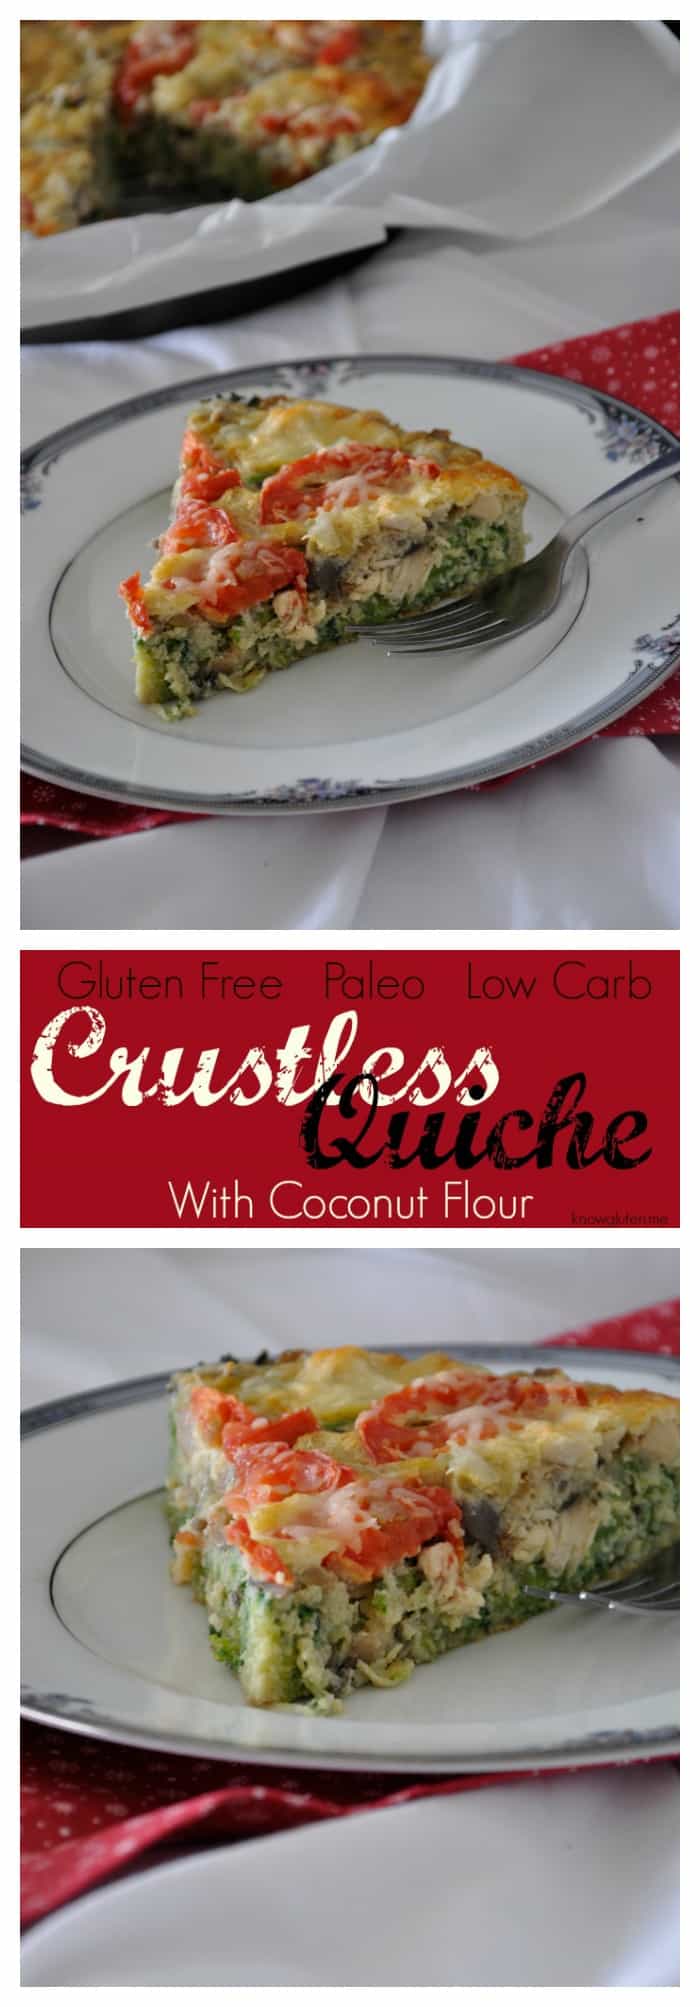 Gluten Free, Paleo, Low Carb, Crustless Quiche made with Coconut Flour from knowgluten.me